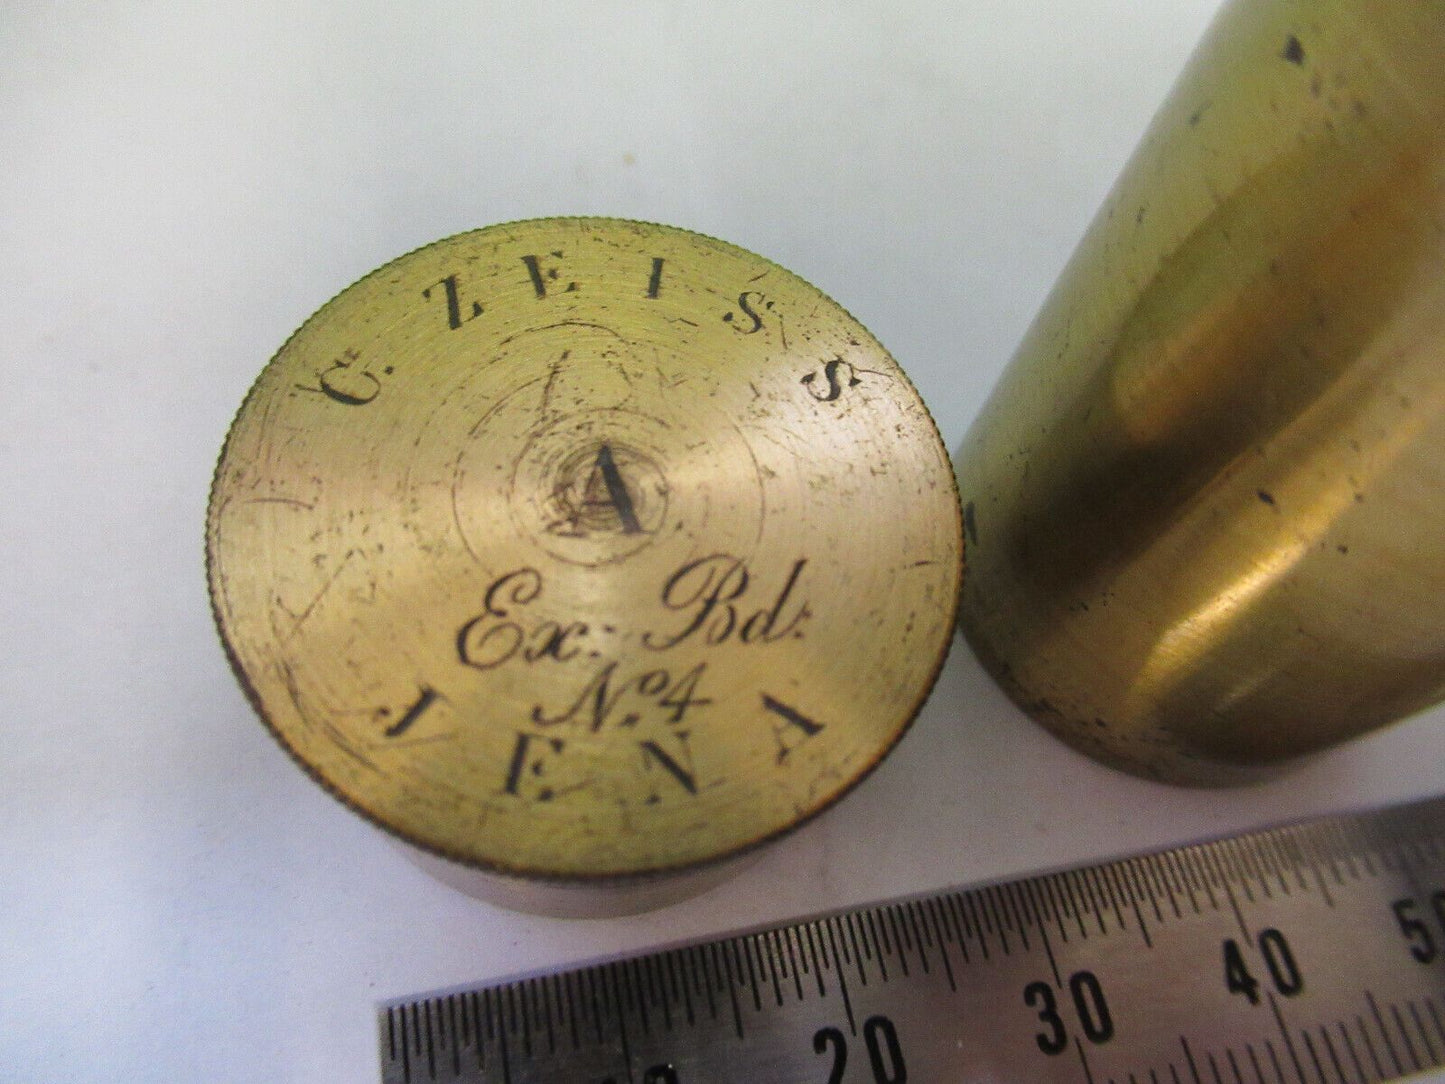 ANTIQUE EMPTY BRASS CAN for ZEISS OBJECTIVE MICROSCOPE PART AS PICTURED Z7-A-40